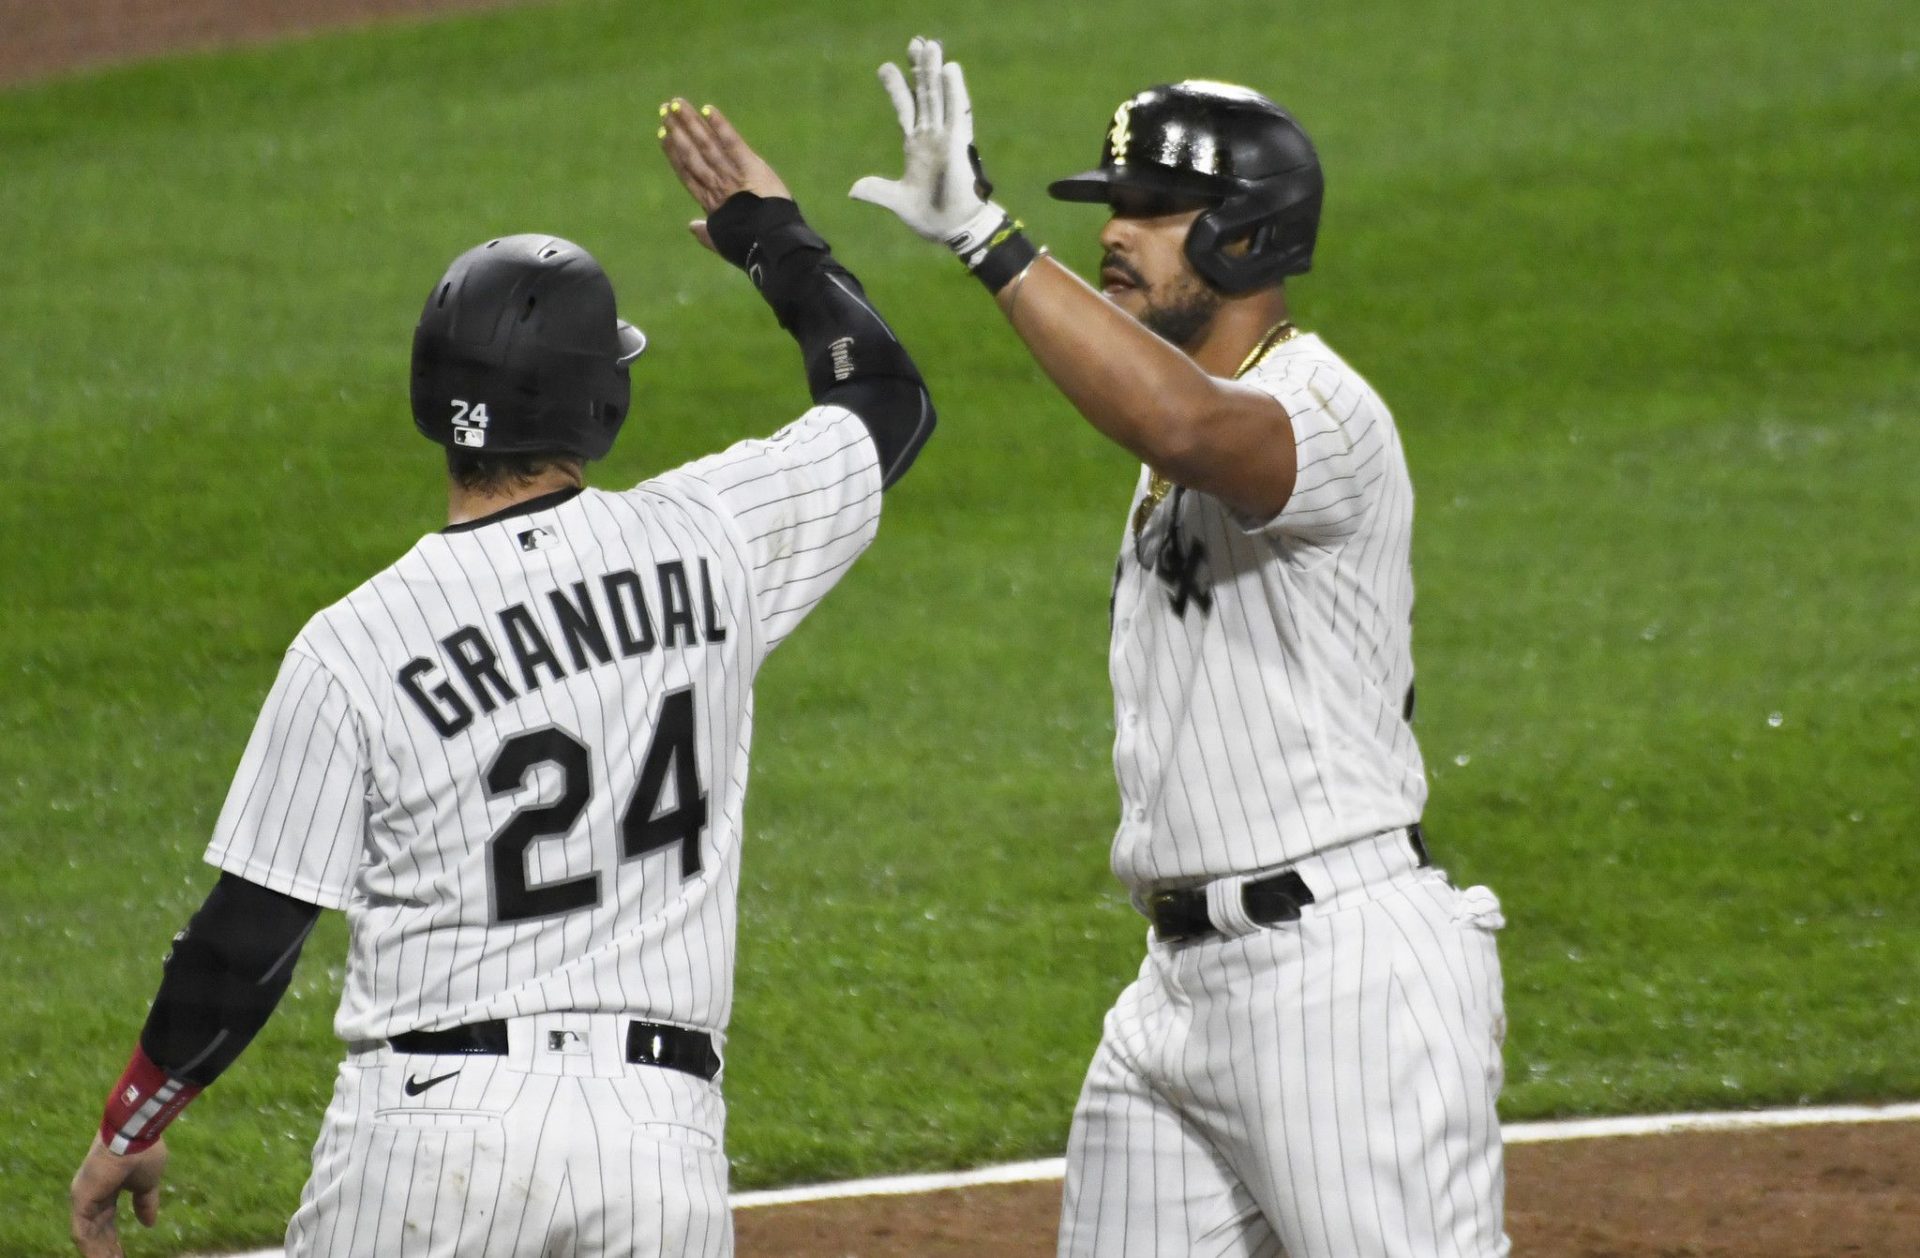 Jose Abreu hits two 3-escape home runs and drives in 7 as the White Sox clobber the Tigers 14-0 in landslide take